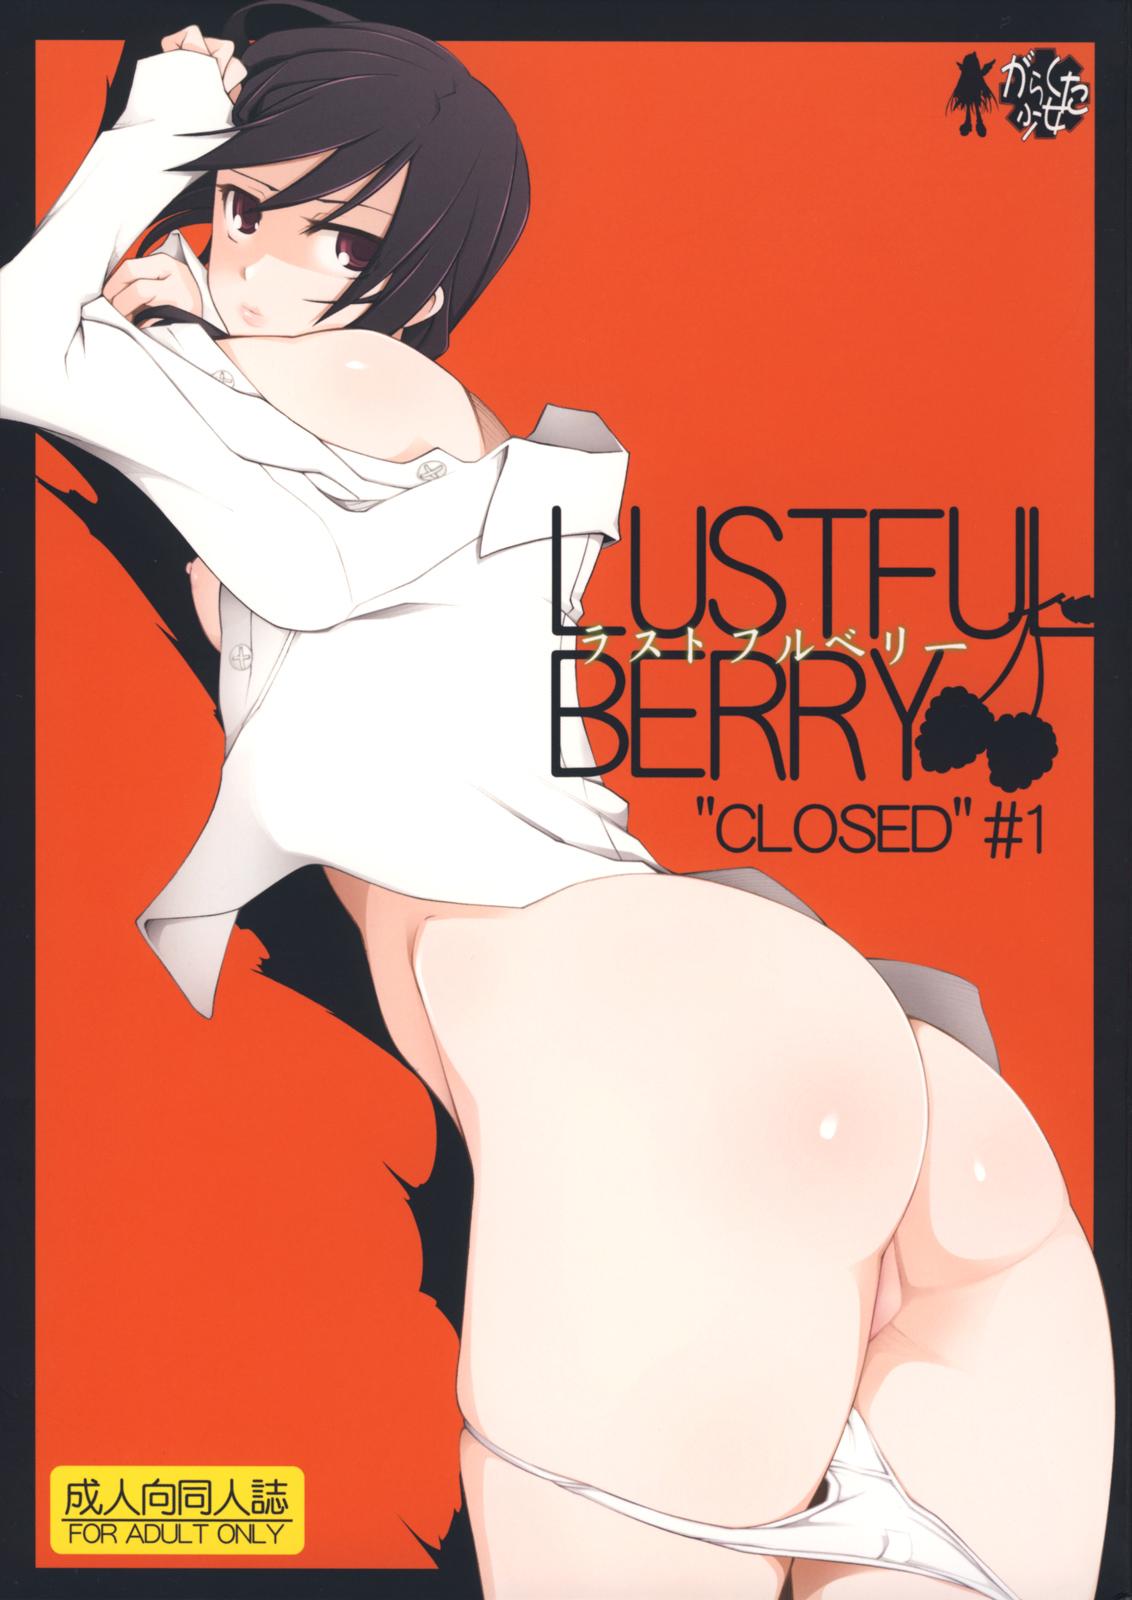 Oldvsyoung LUSTFUL BERRY ''CLOSED''#1 Gostosas - Page 1